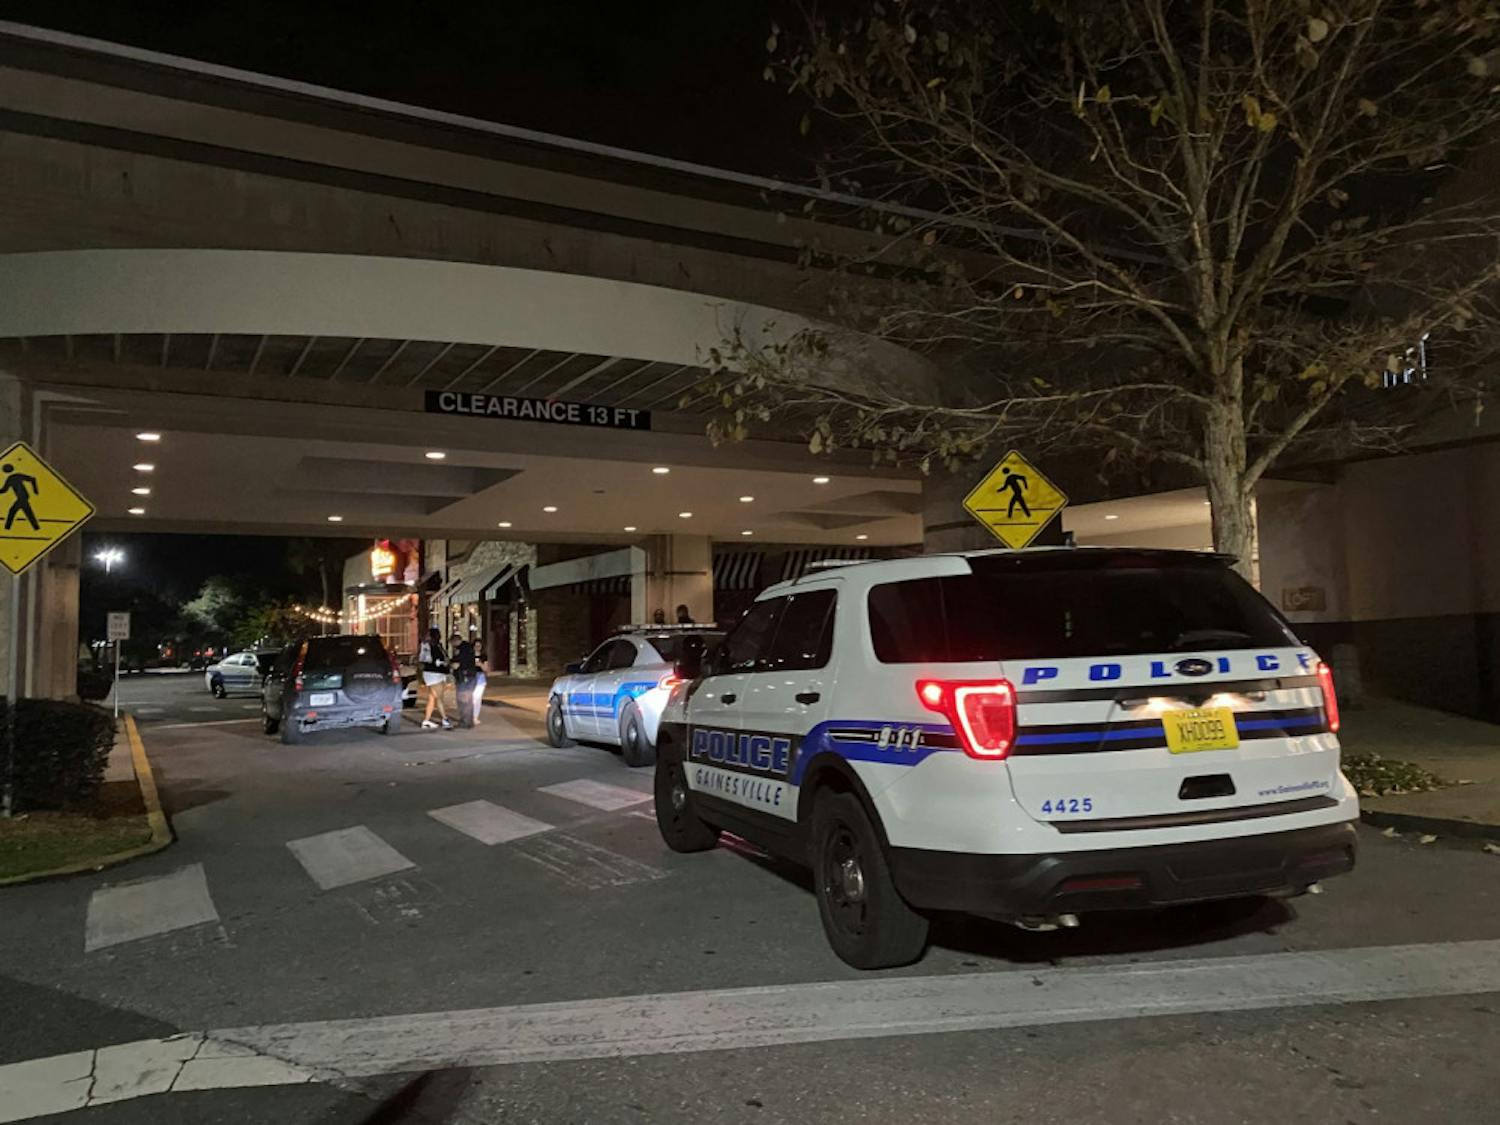 Law enforcement officers interview witnesses in front of Oaks Mall Thursday night after reports of a robbery in front of Pearle Vision, an eye care store located inside the mall.&nbsp;